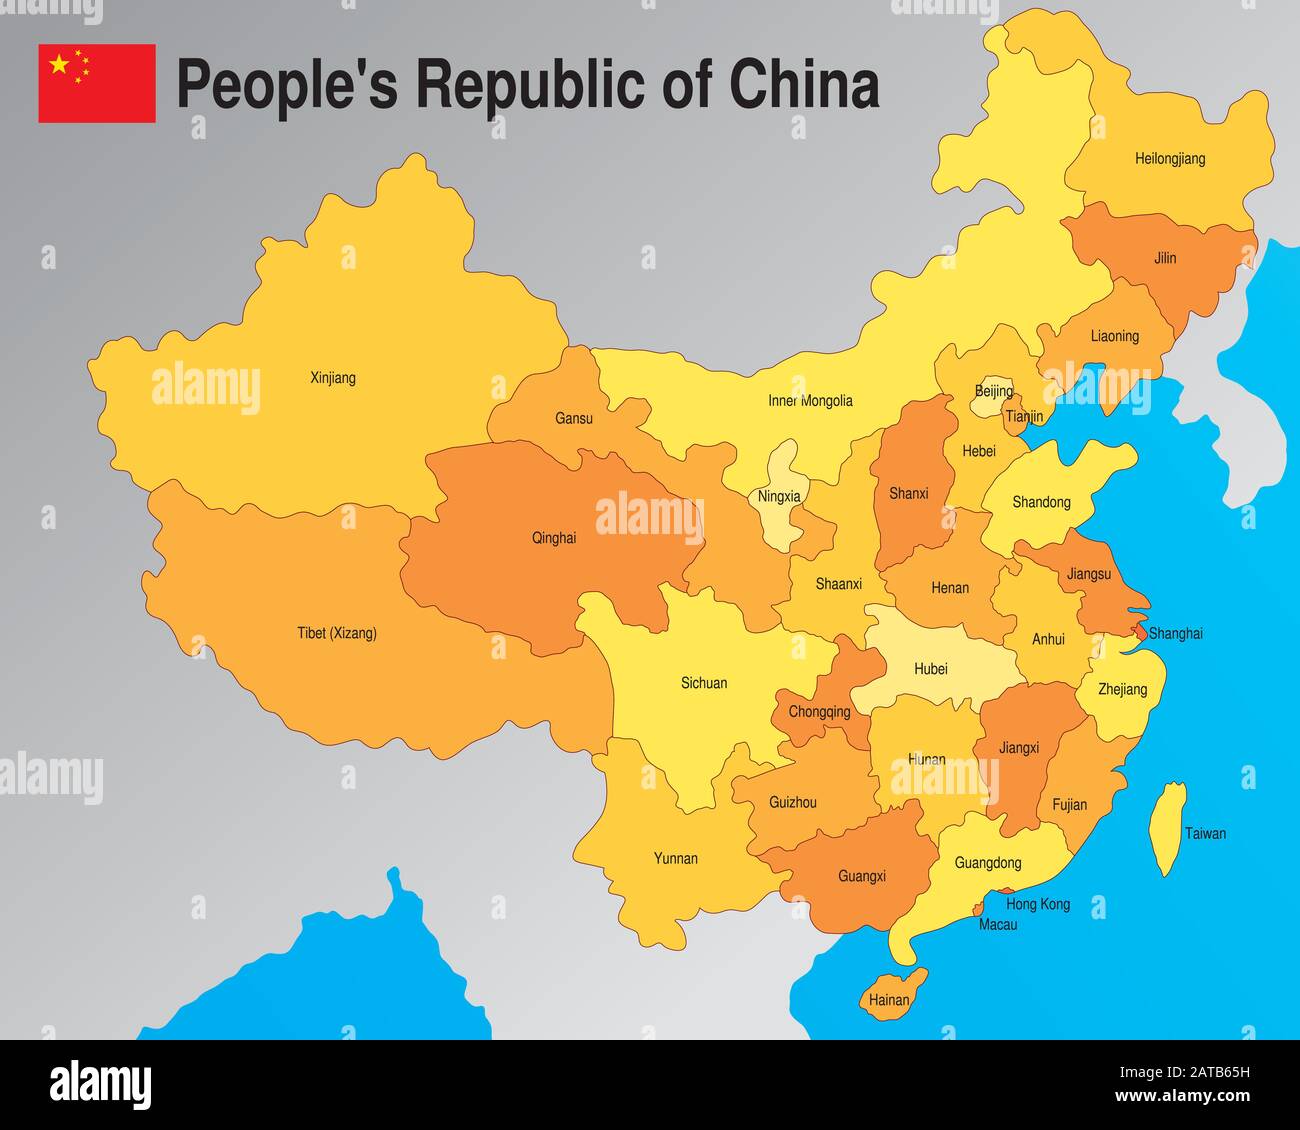 Political map of the People's Republic of China with the division of the provinces with their names in yellow and orange tones. Vector image Stock Vector